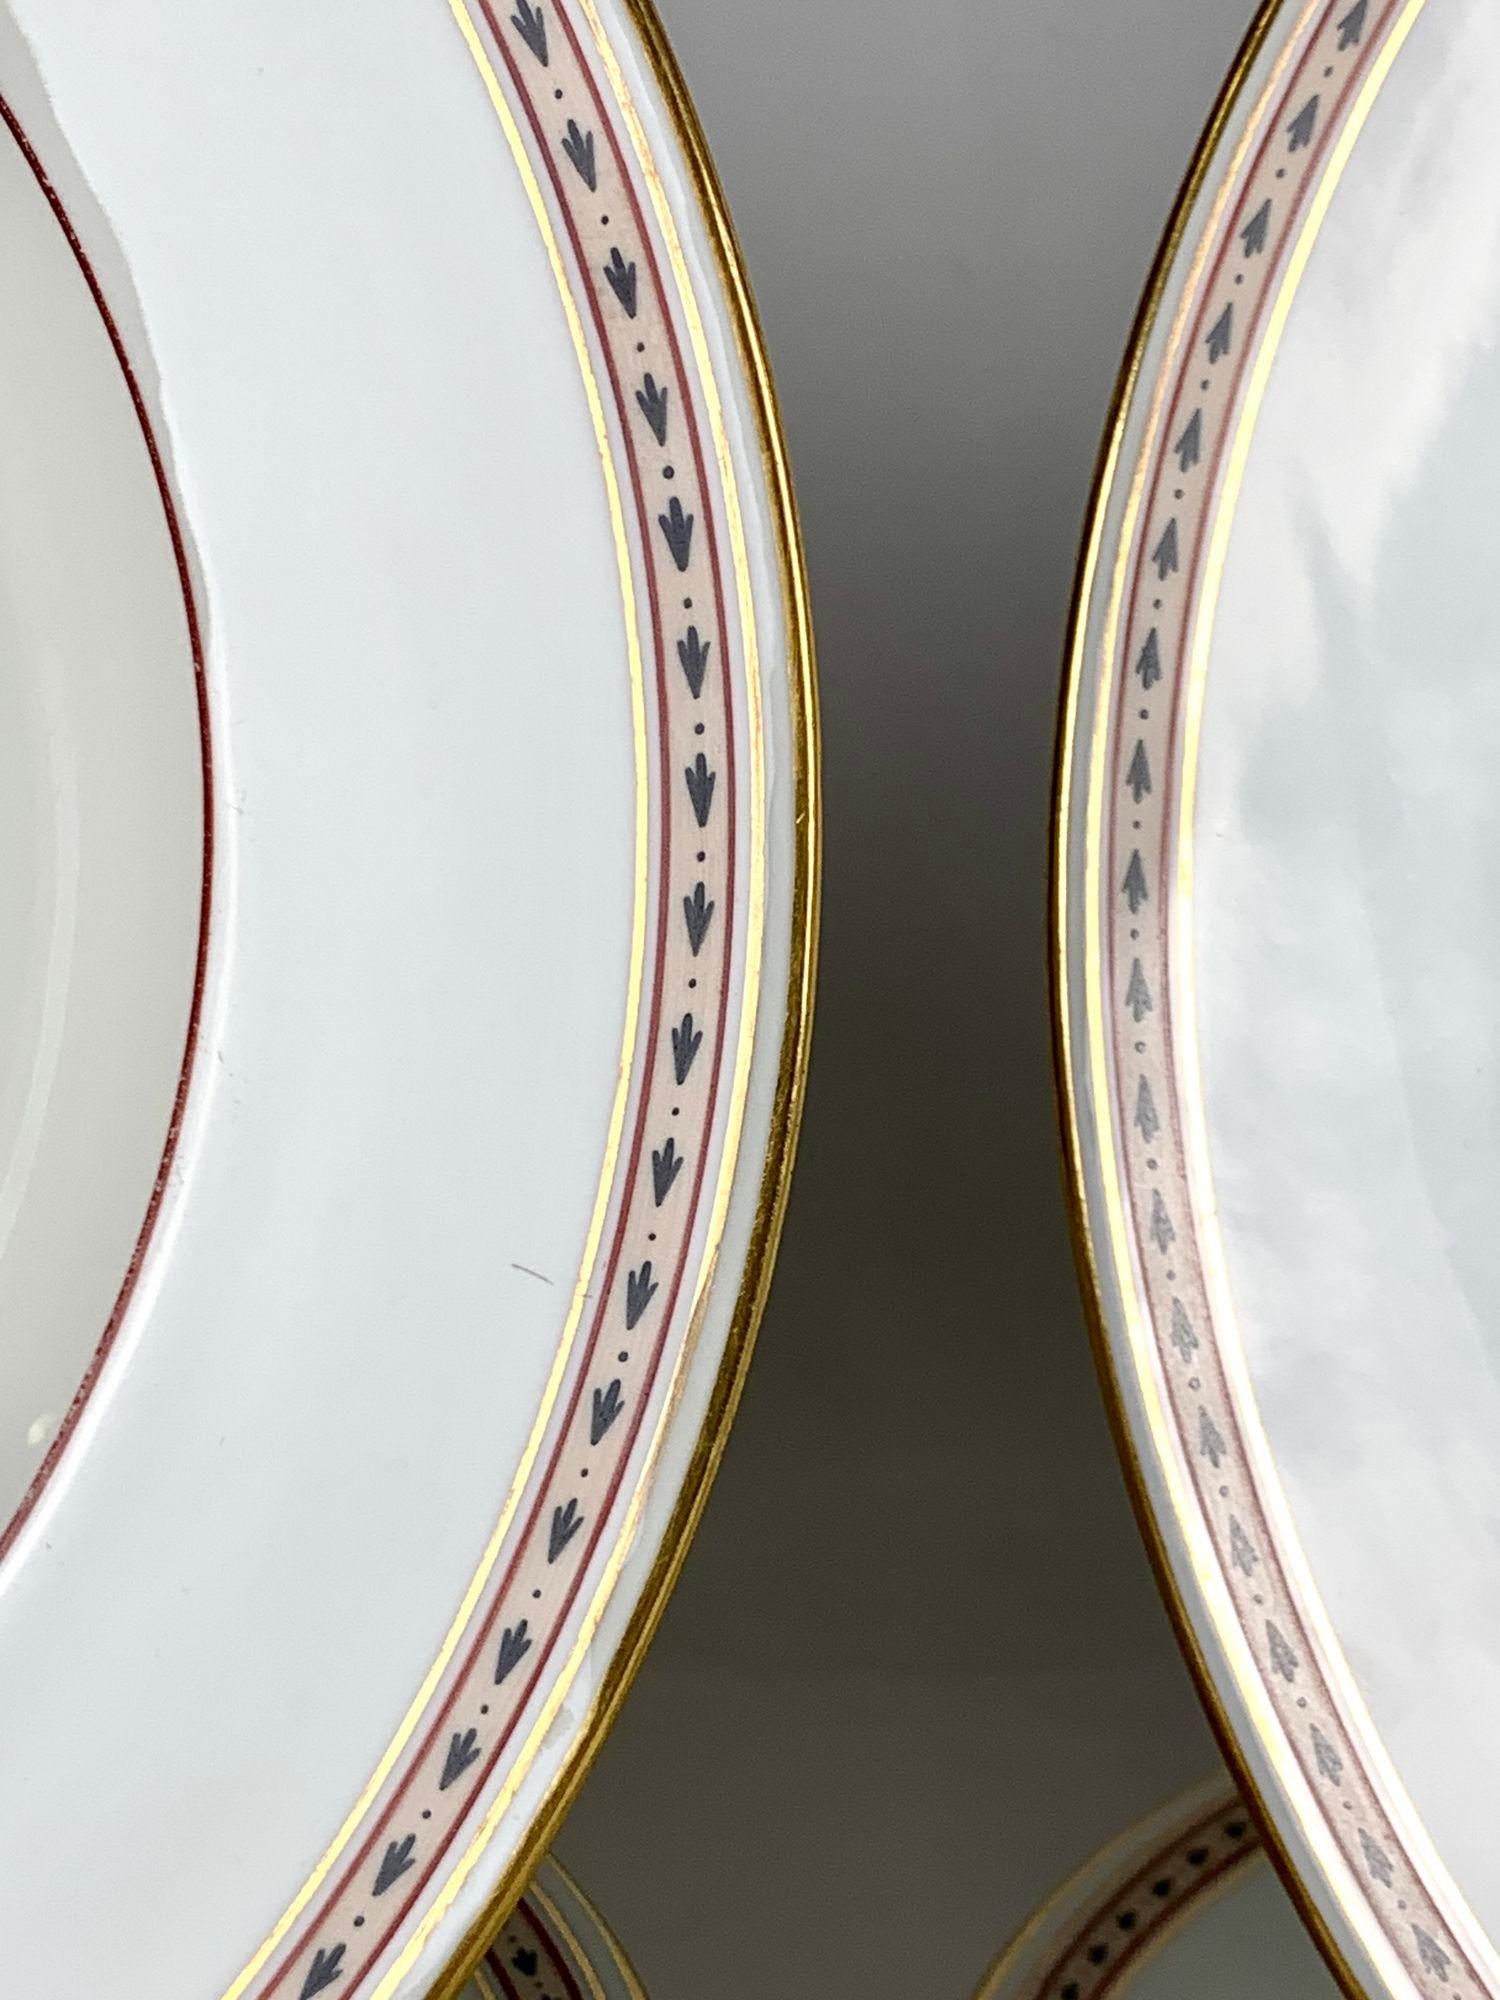 This lovely set of hand painted 18th-century Imperial Vienna Porcelain dishes features four dinner dishes, four soup/pasta dishes,
and a pair of chargers for serving.
The decoration is delicate and elegant.
Along the edge, we see a band of black